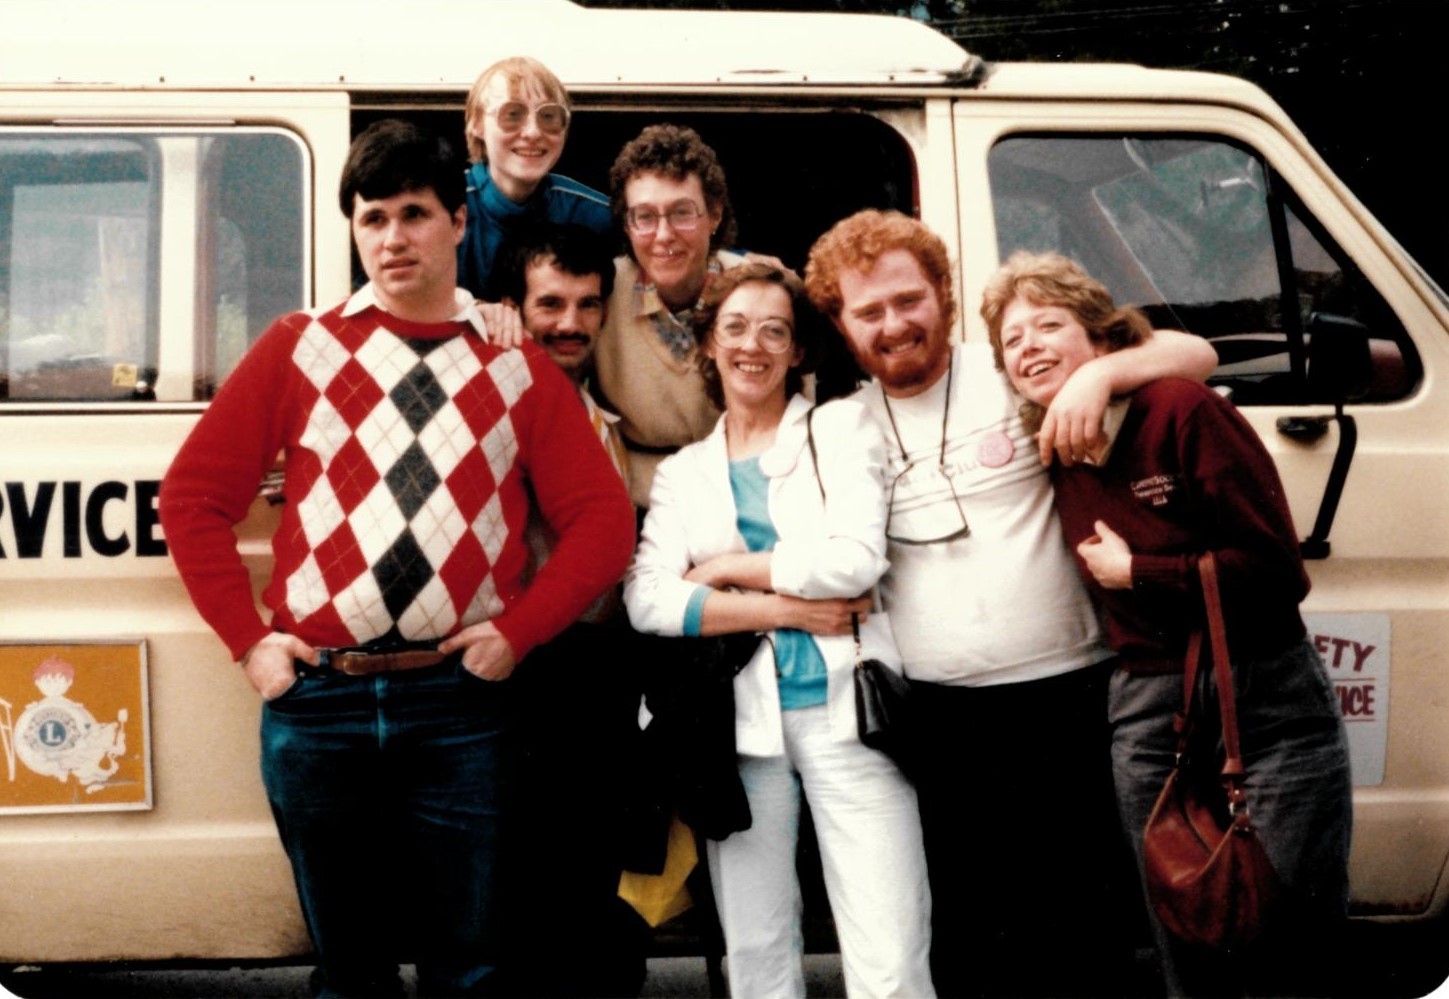 The Carefree Team back in the 80's.